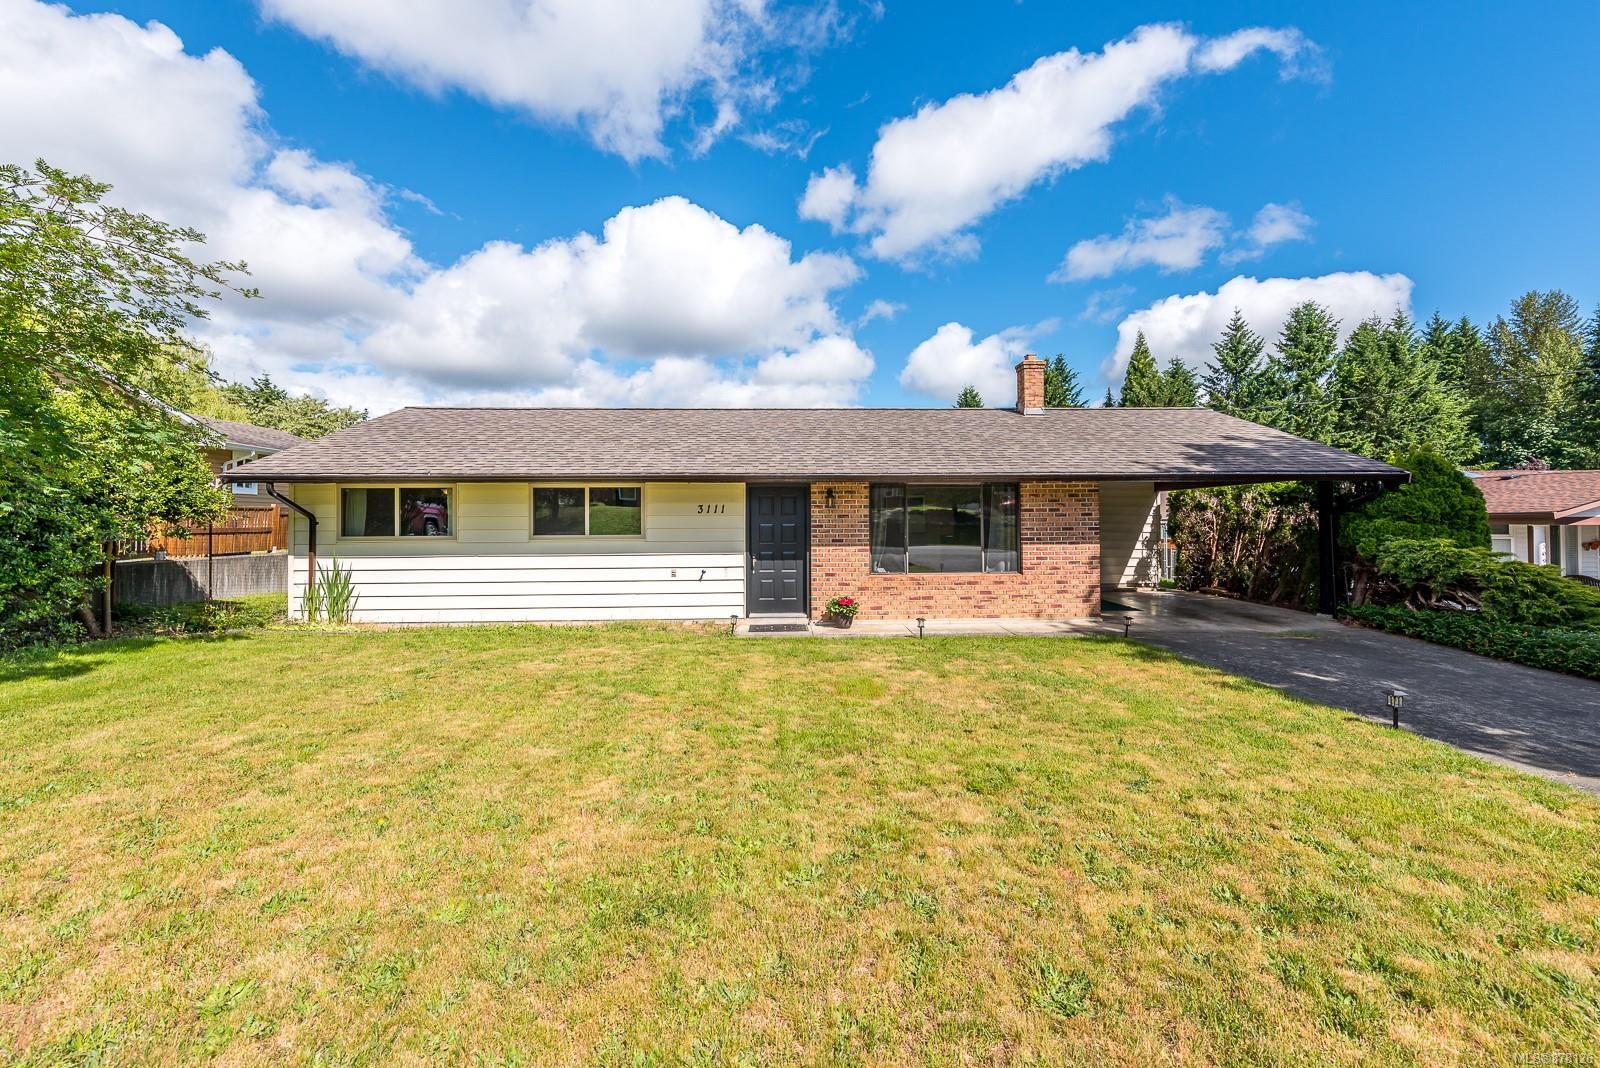 Main Photo: 3111 Bood Rd in Courtenay: CV Courtenay West House for sale (Comox Valley)  : MLS®# 878126